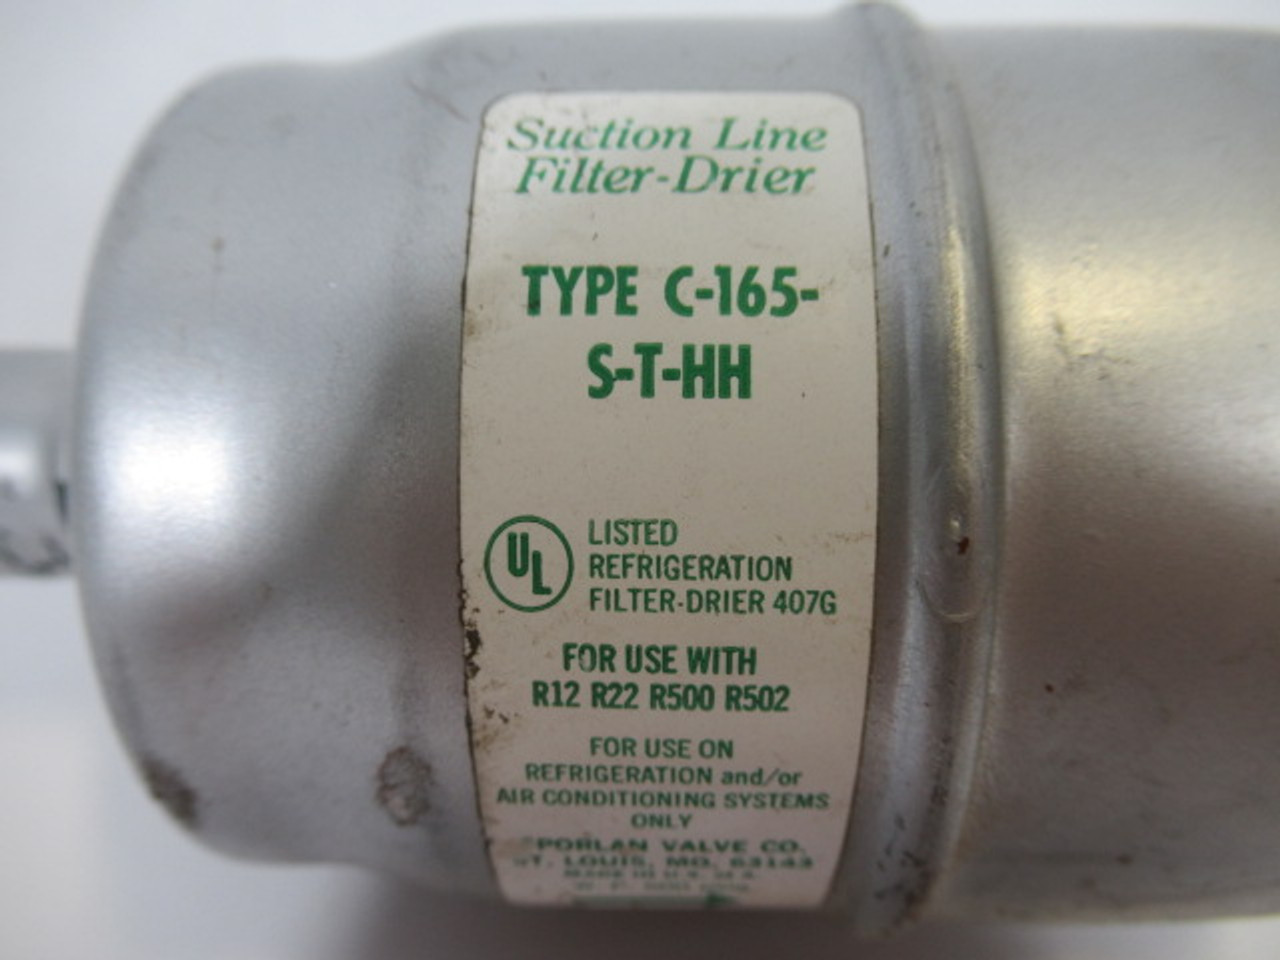 Sporlan Valve Co C-165-S-T-HH Suction Line Filter Drier USED